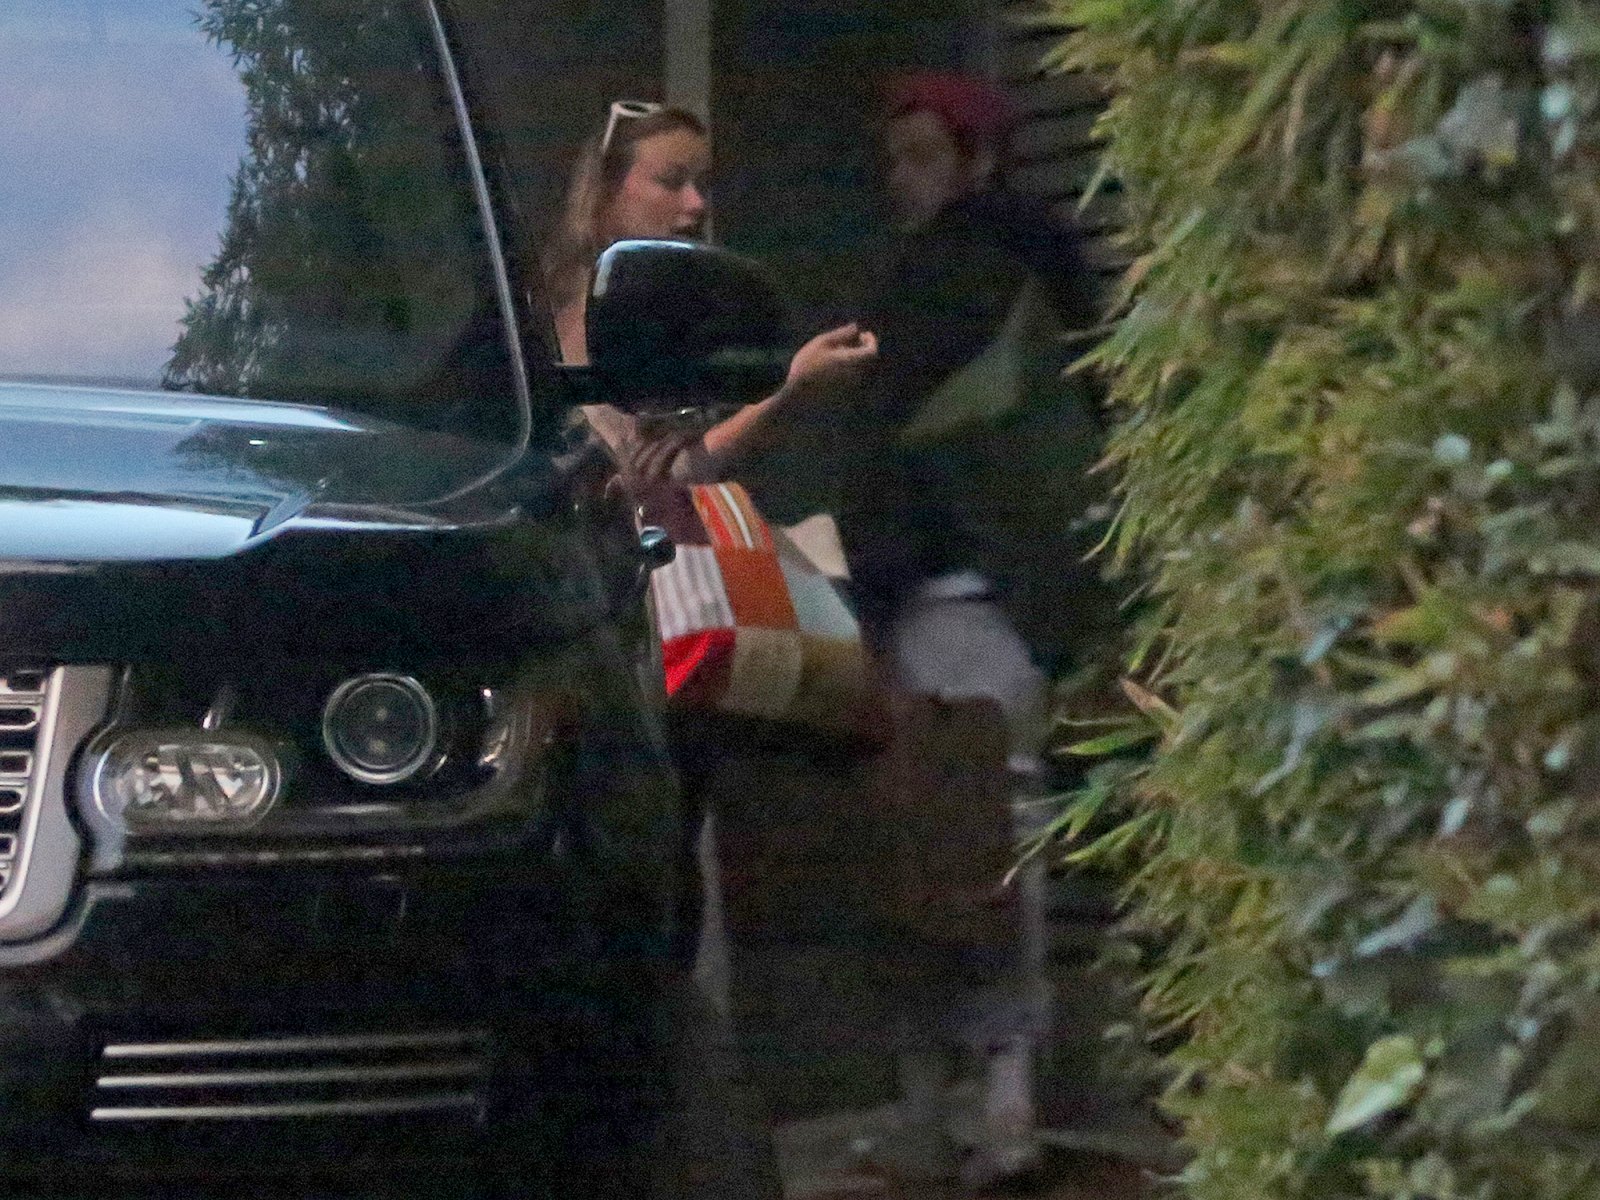 Harry Styles and Olivia Wilde Spotted Together at His L.A. Home Amid Relationship Rumors